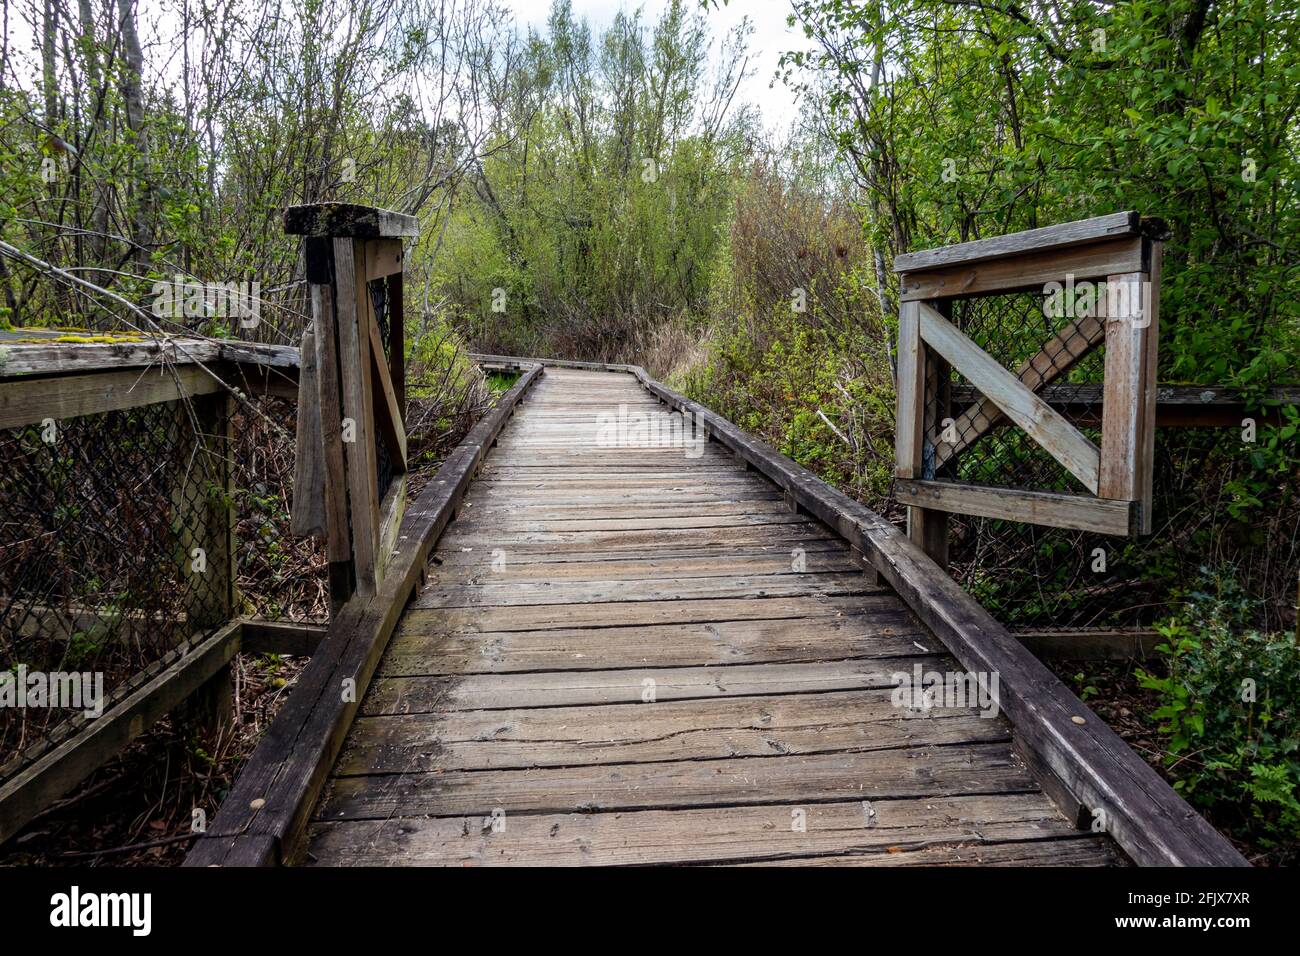 View of a wooden boardwalk with the wooden gate open in a marshland park on a cloudy day Stock Photo